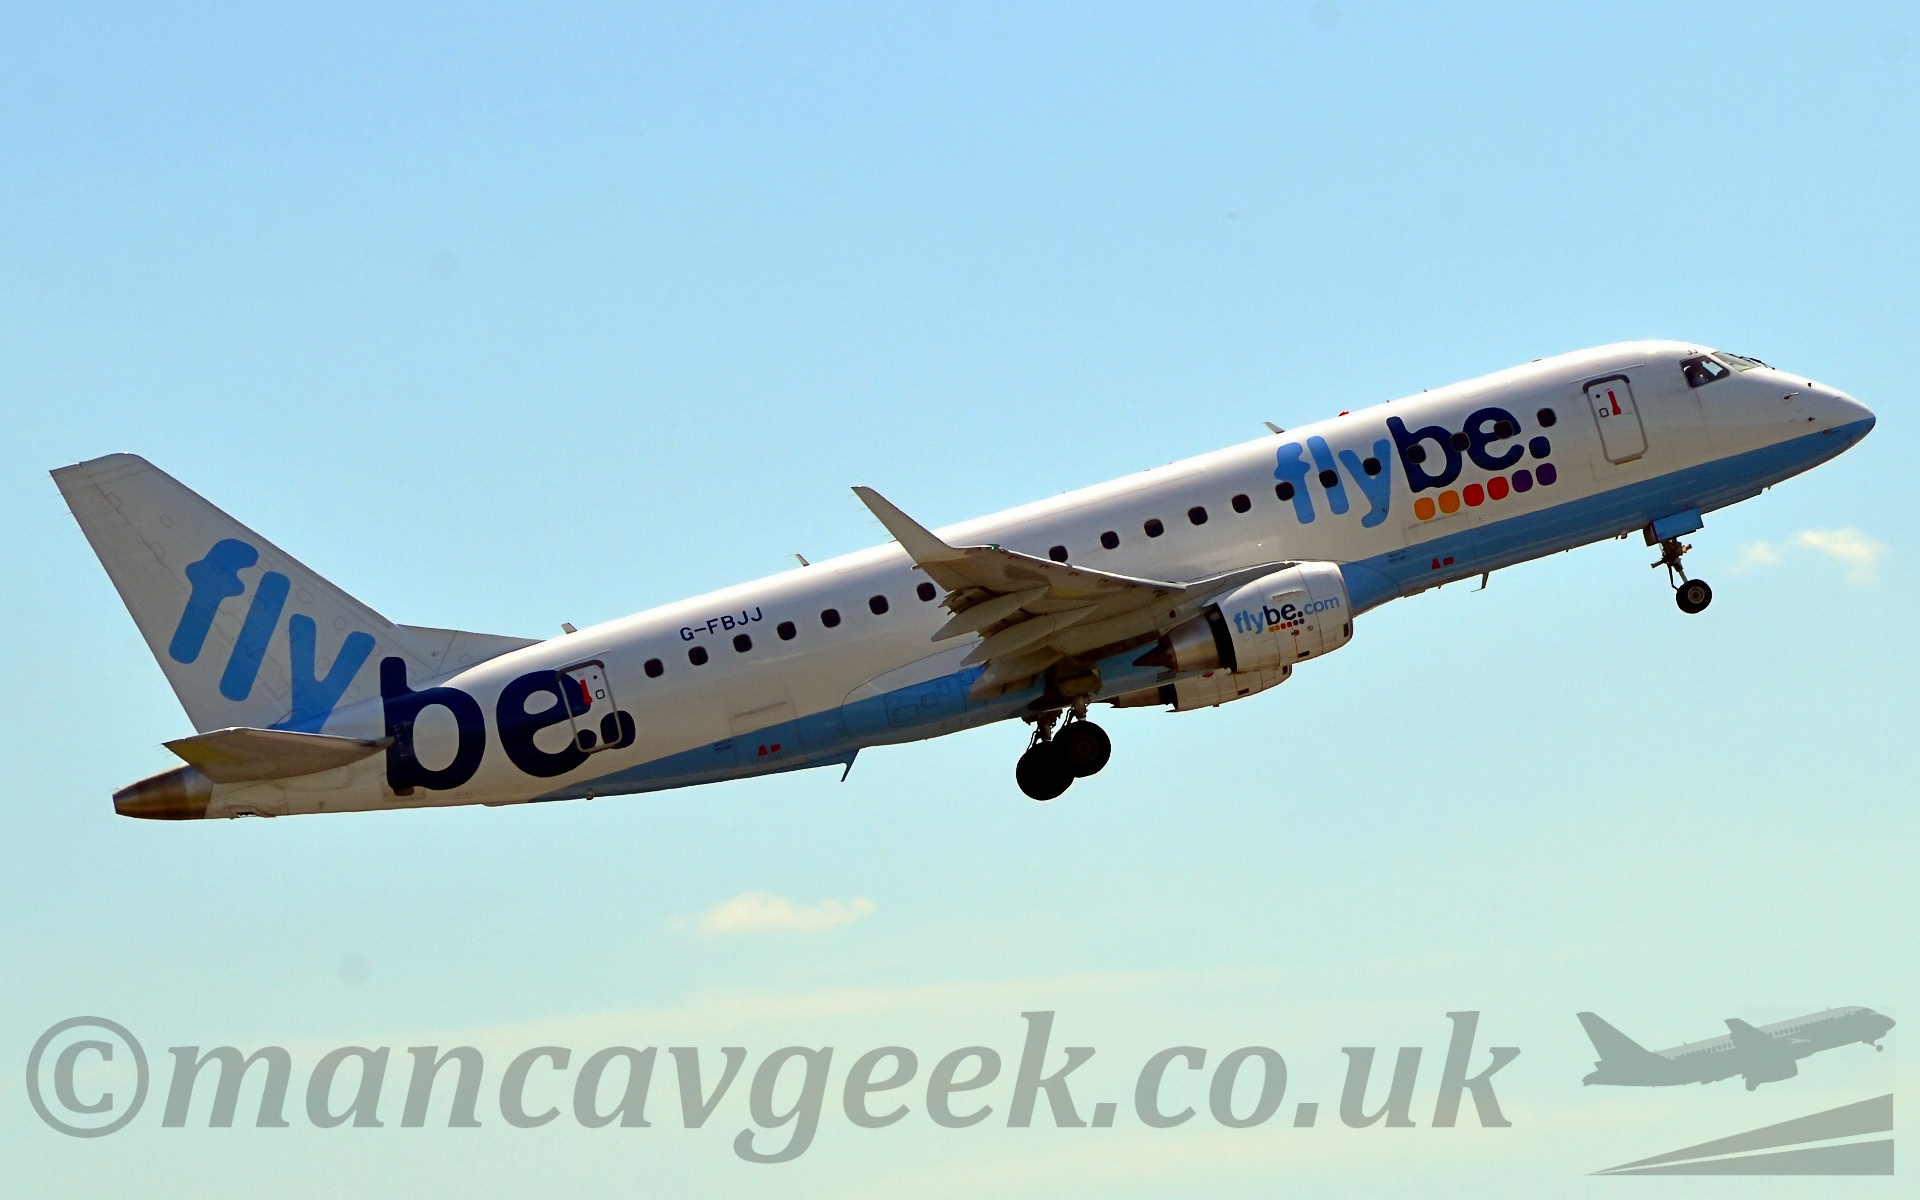 Side view of a twin engined jet airliner flying from left to right with it's undercarriage lowered and flaps deployed from behind the wing, and it's nose raised fairly steeply. The plane has a sky blue belly, the rest being white. There are large "Flybe" titles in light and dark blue on the forward fuselage above some multi-coloured dots, and larger similar titles on the tail and rear fuselage. Behind, the sky is fiding from a clear blue at the top to a hazy white at the bottom.